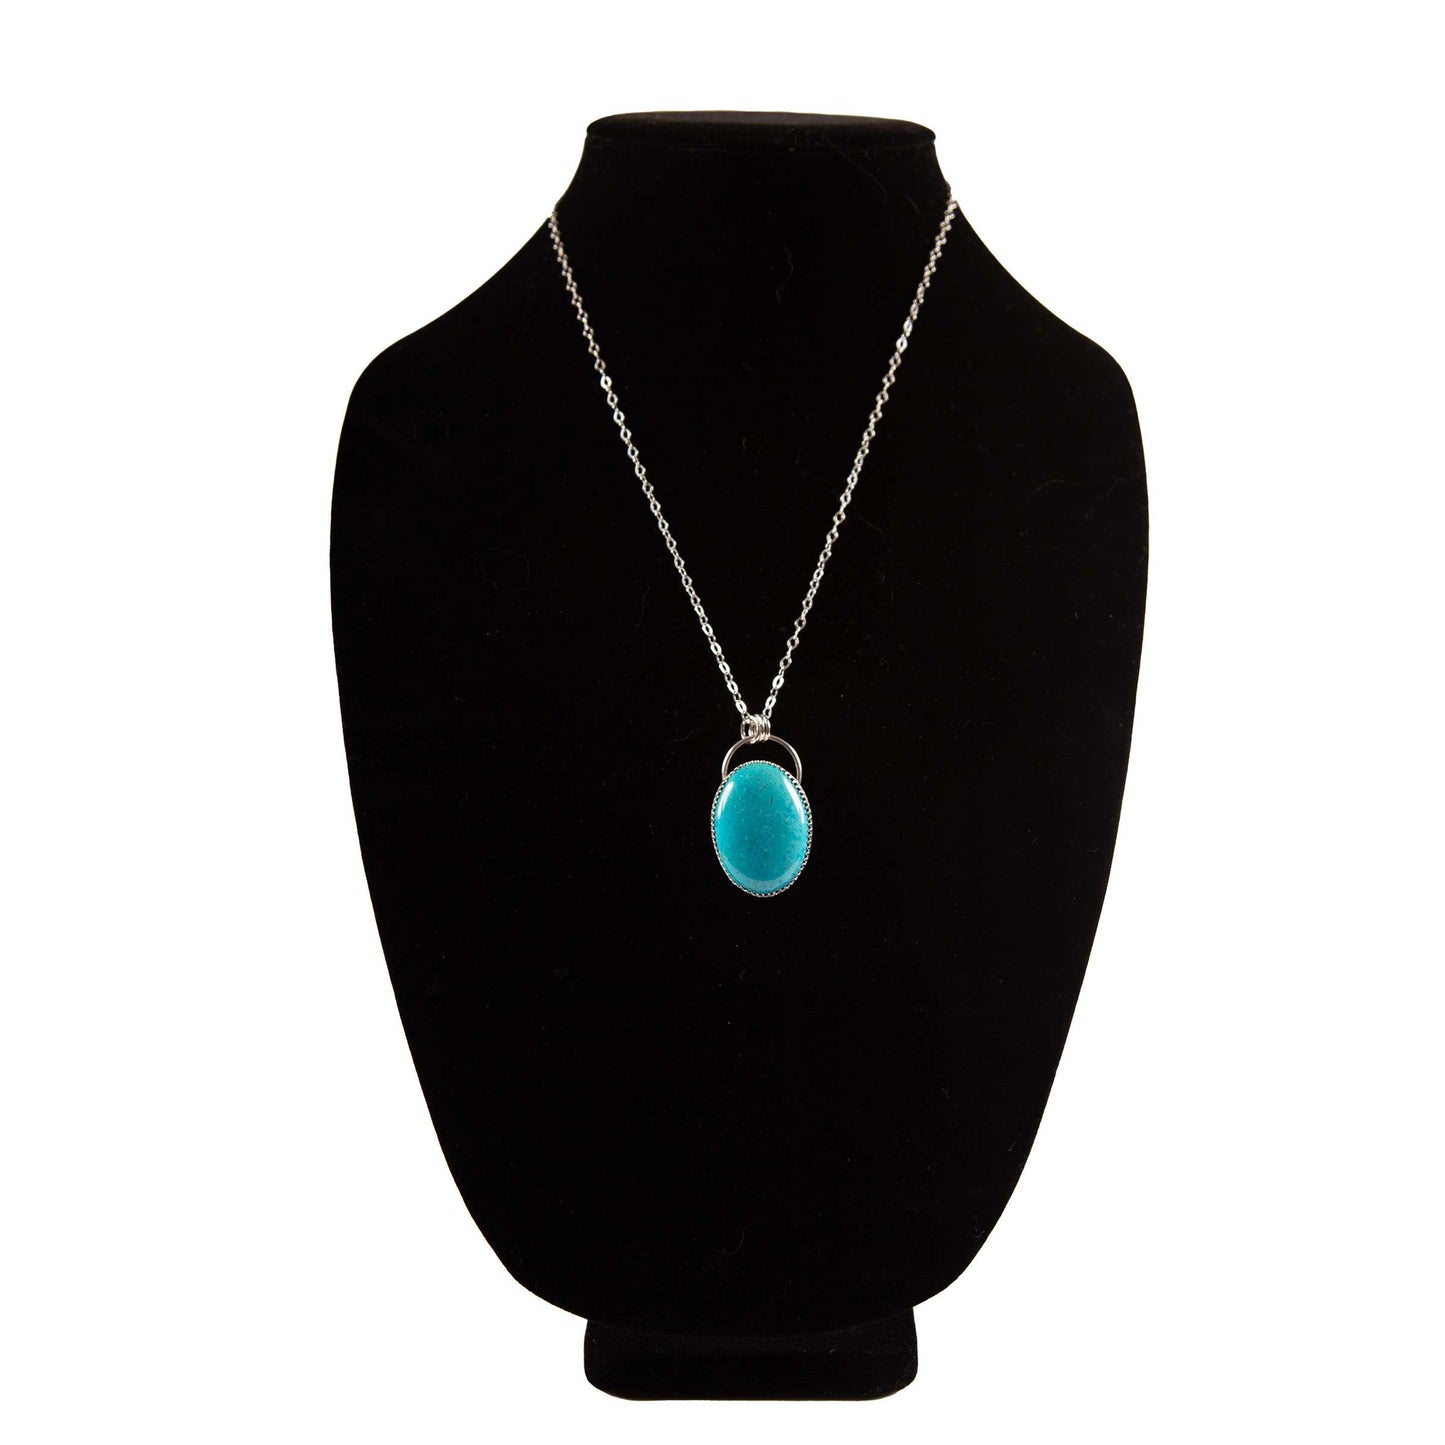 Kingman Mine turquoise, pendant, Sterling silver, testerling silver, 20-inch, Rolo,  Rolo chain with clasp, 1.75" x 1.75"